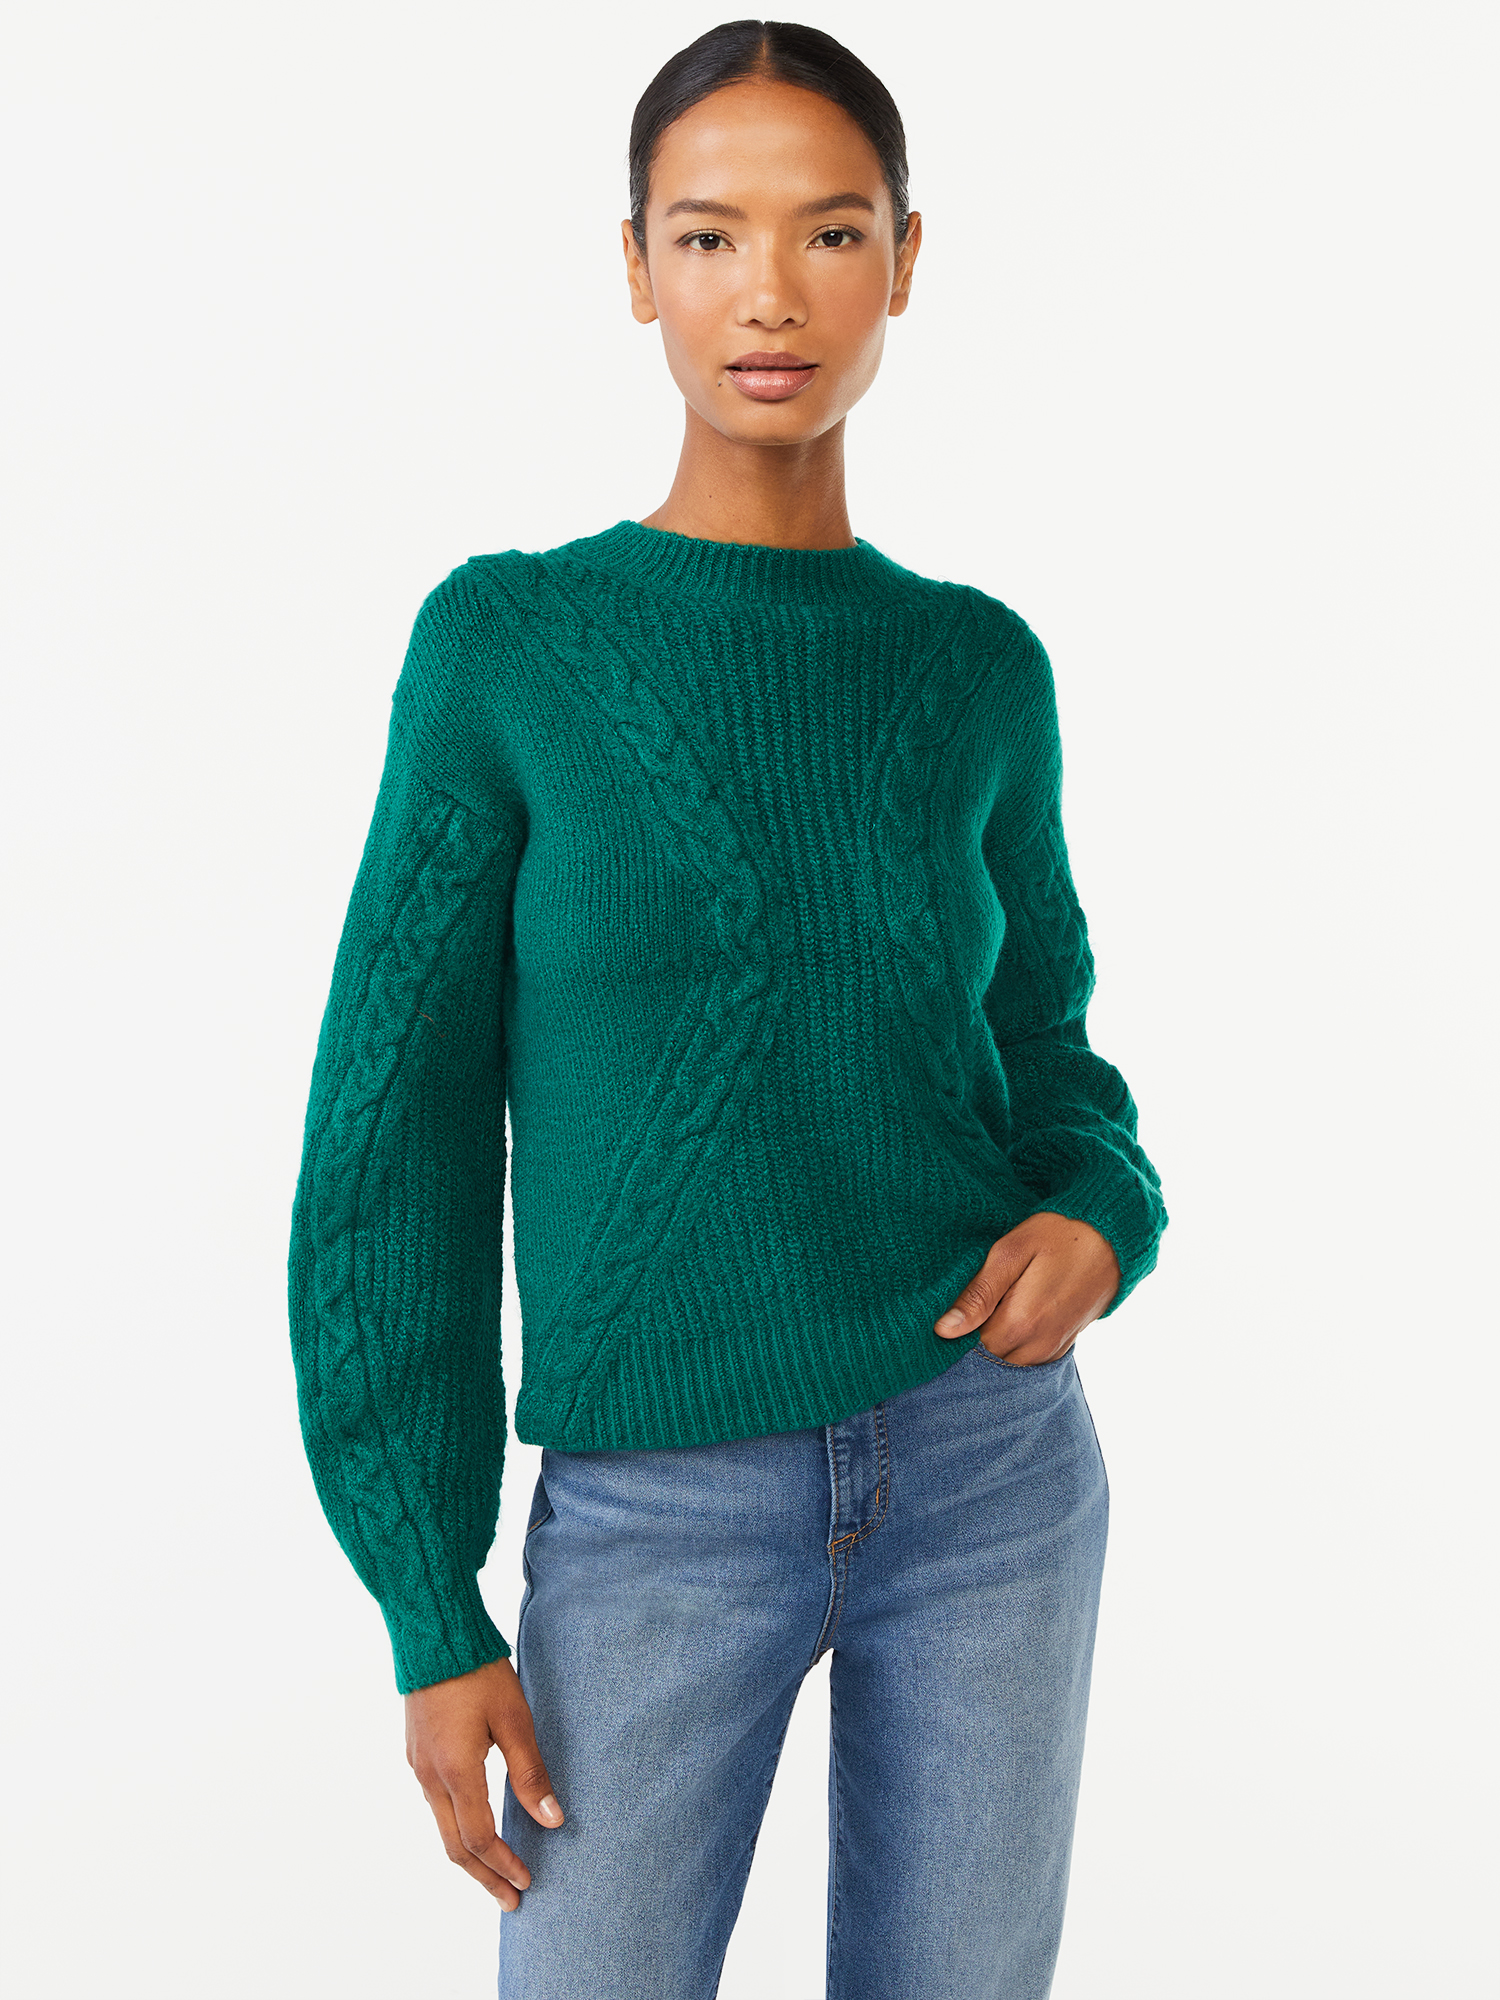 Scoop Women's Textured Cable Knit Sweater - image 1 of 5